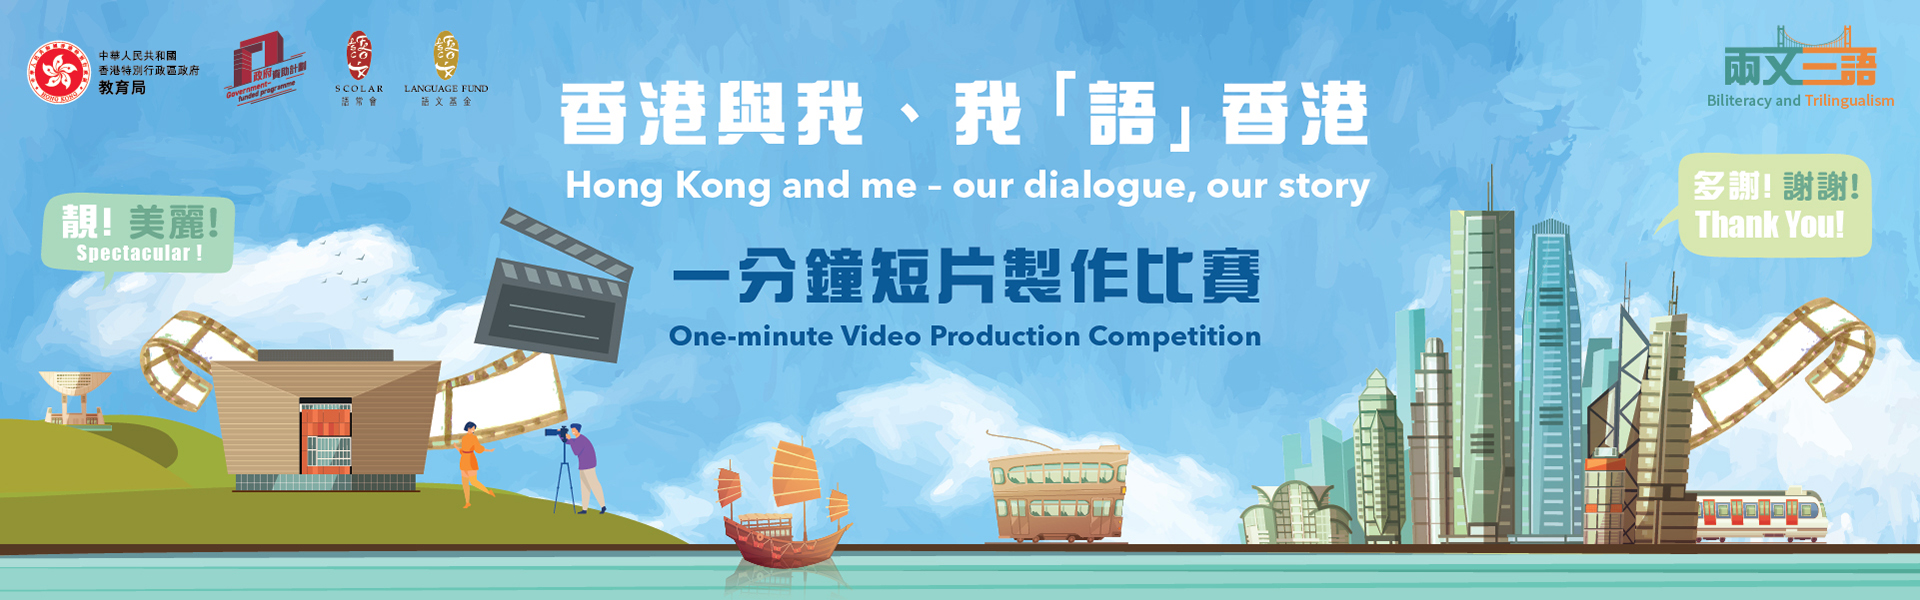 One-minute Video Production Competition